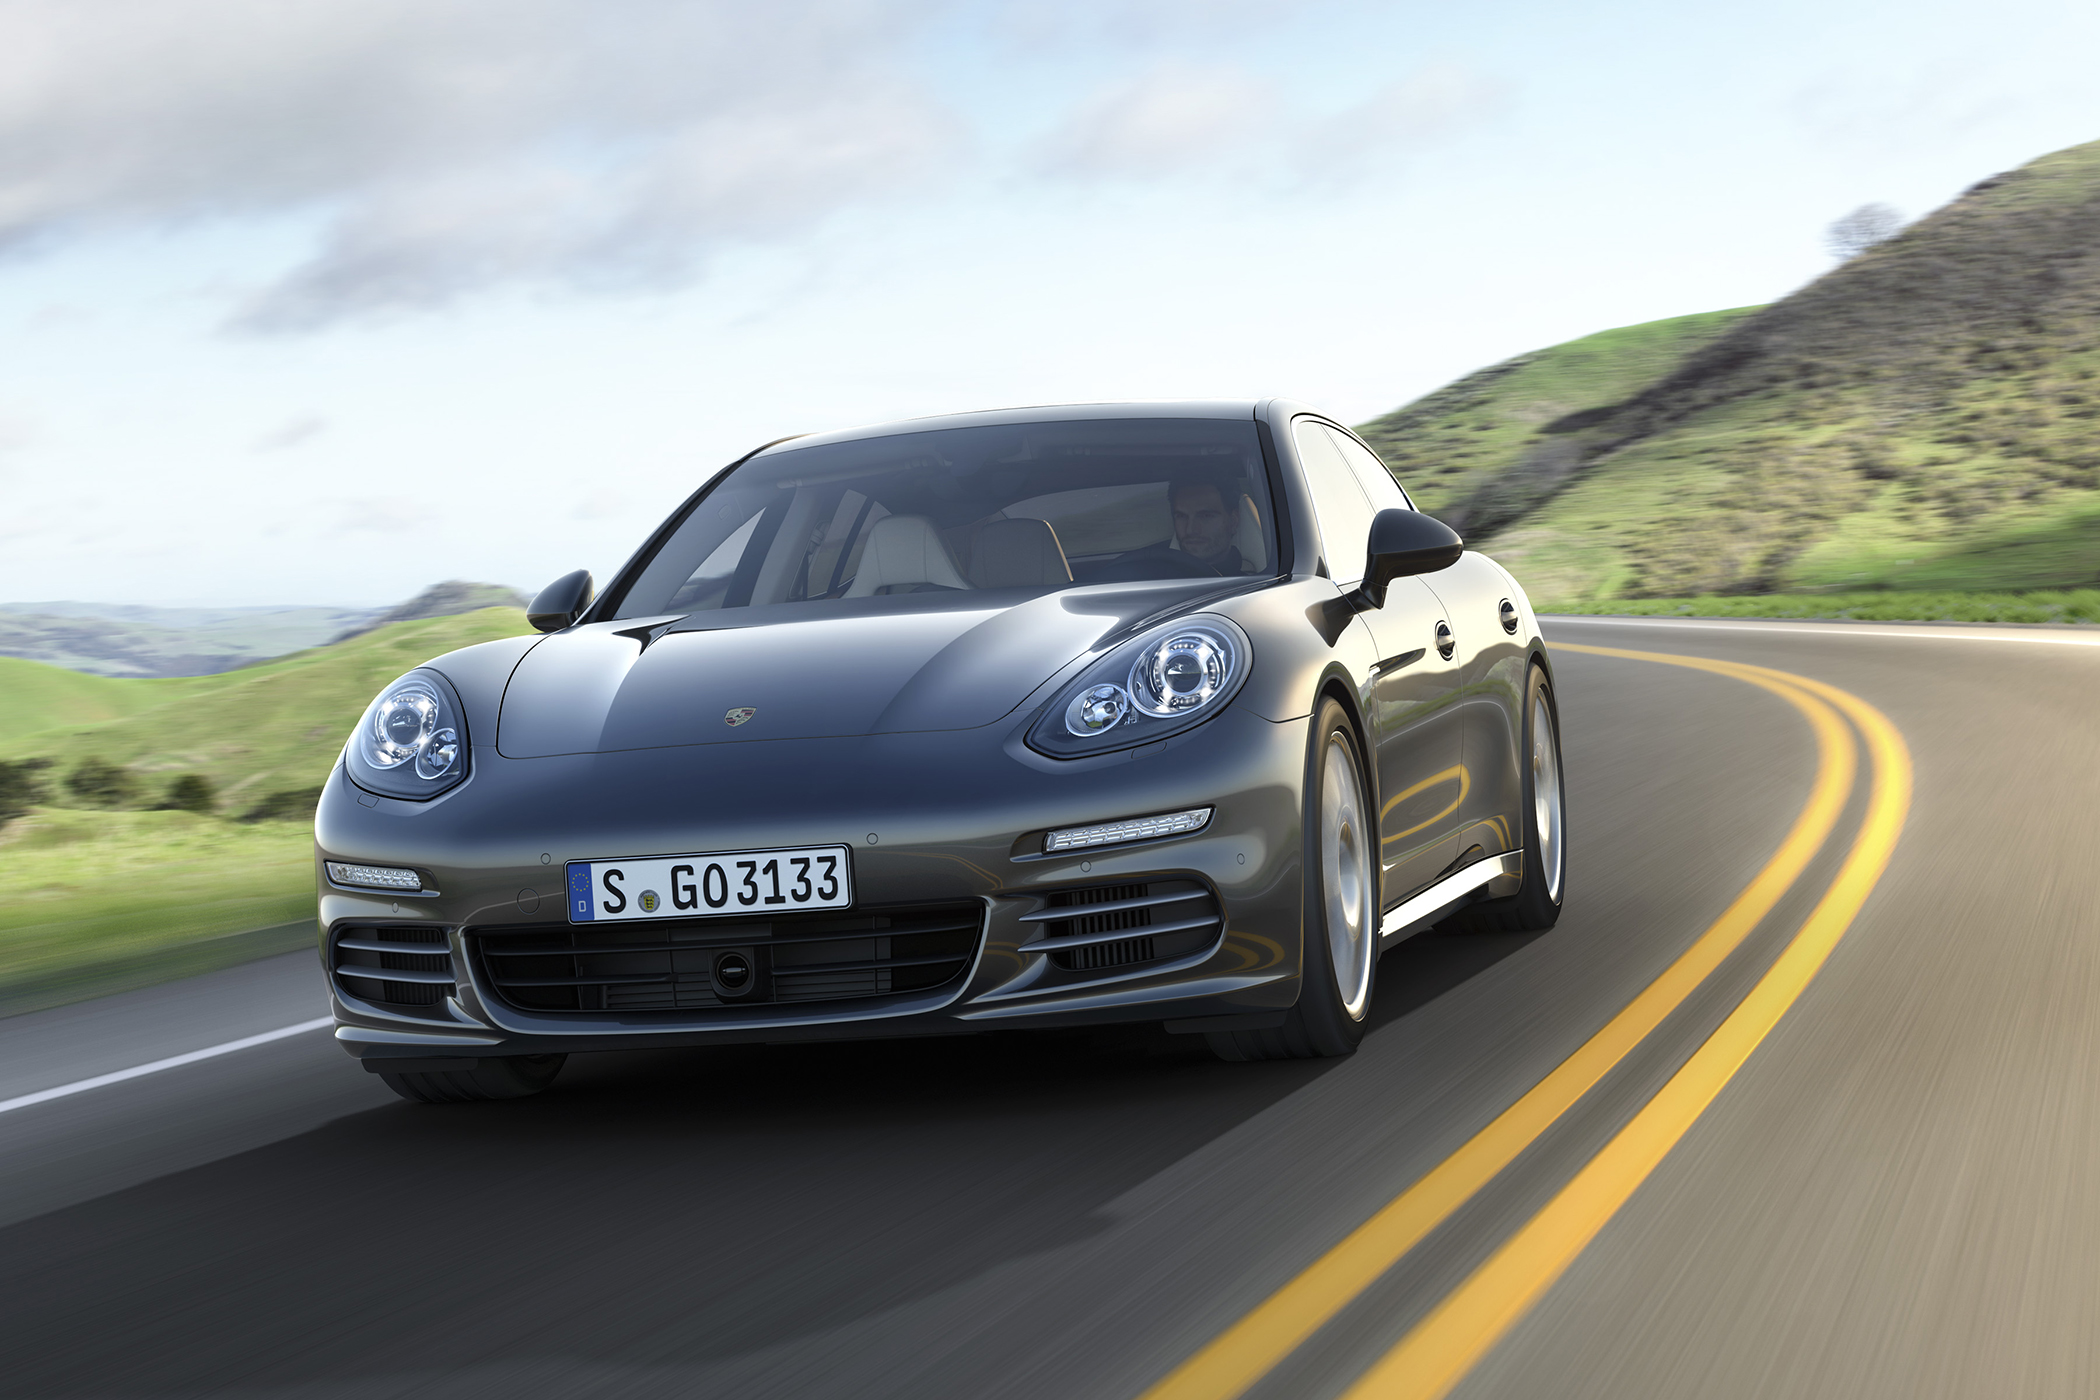 <strong>Best Sports Car:</strong> The <a href="http://www.edmunds.com/porsche/panamera/2016/" target="_blank">Porsche Panamera</a> makes an appearance on the Best Retained Value Awards list four times in six years. As is the case for all luxury vehicles, it depreciates faster than non-luxury models. At $86,981, it depreciates nearly 53% over five years.